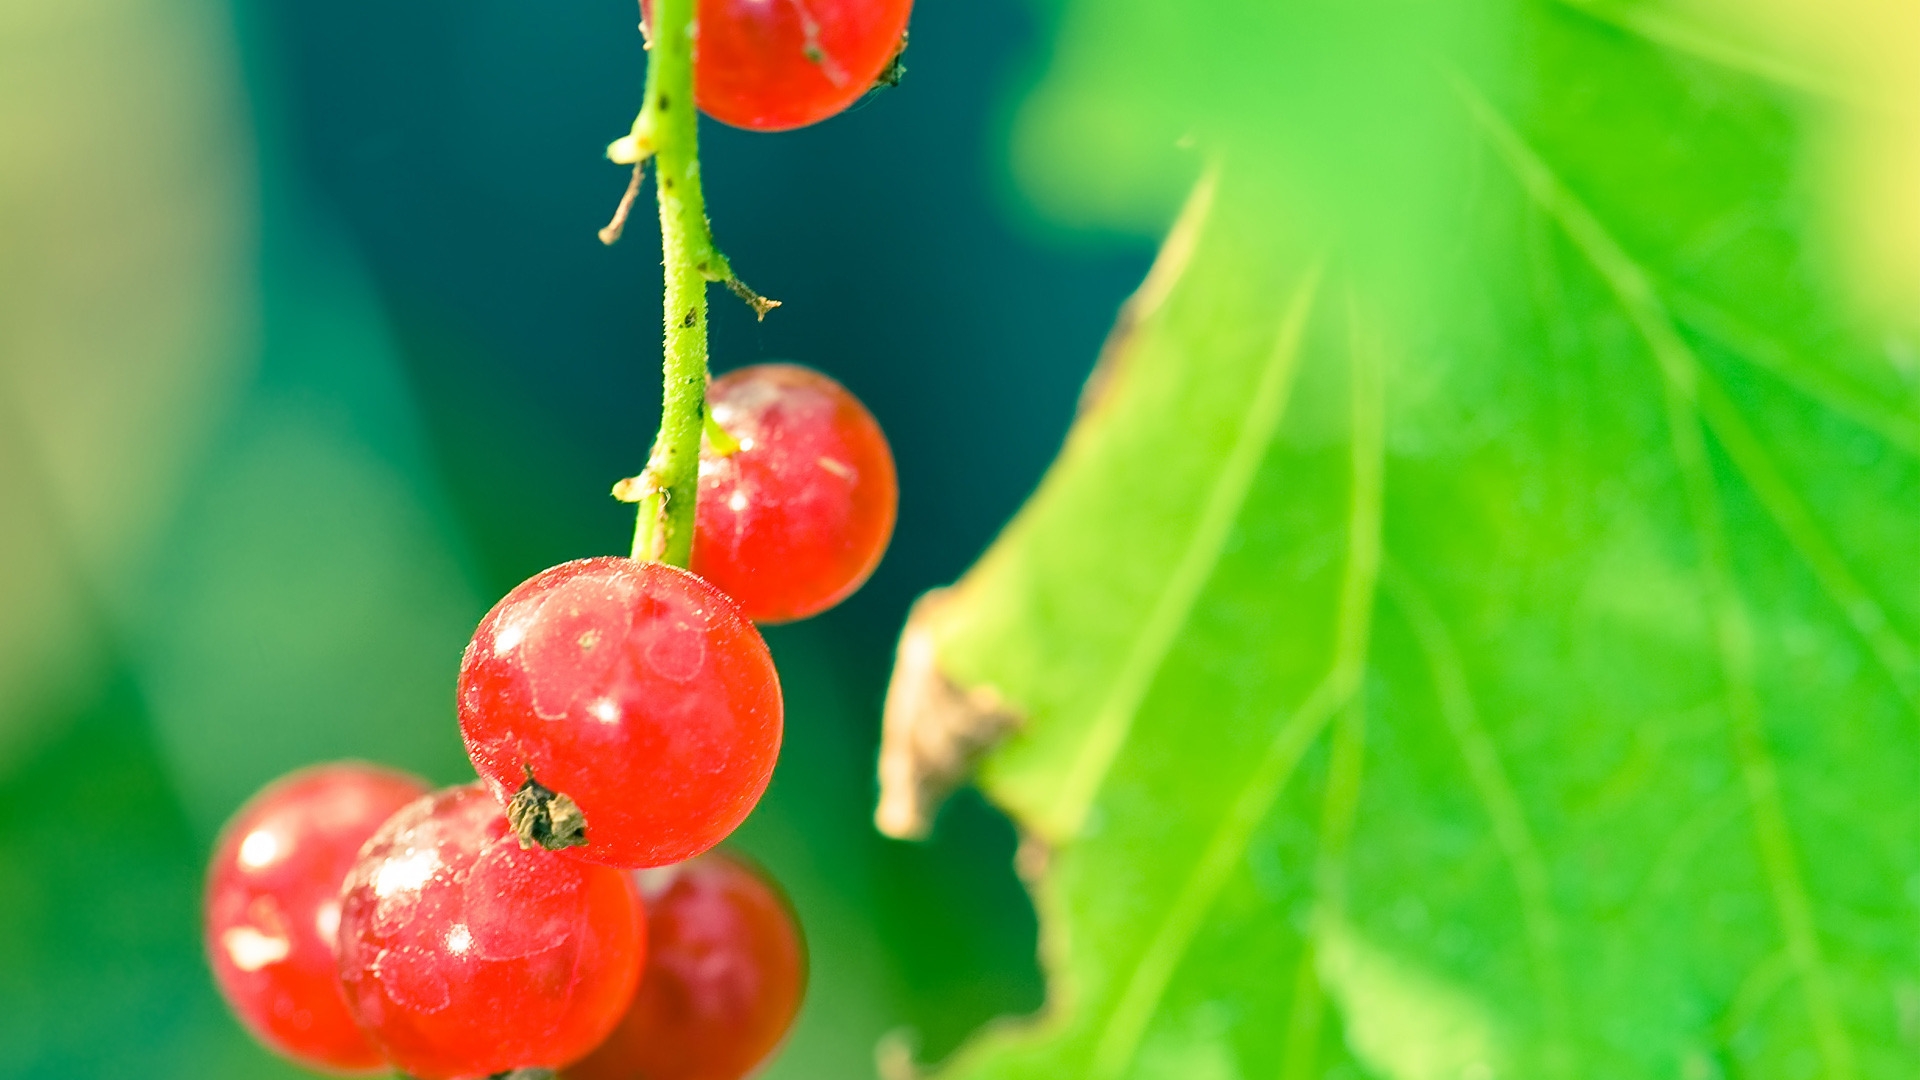 Currant branch for 1920 x 1080 HDTV 1080p resolution